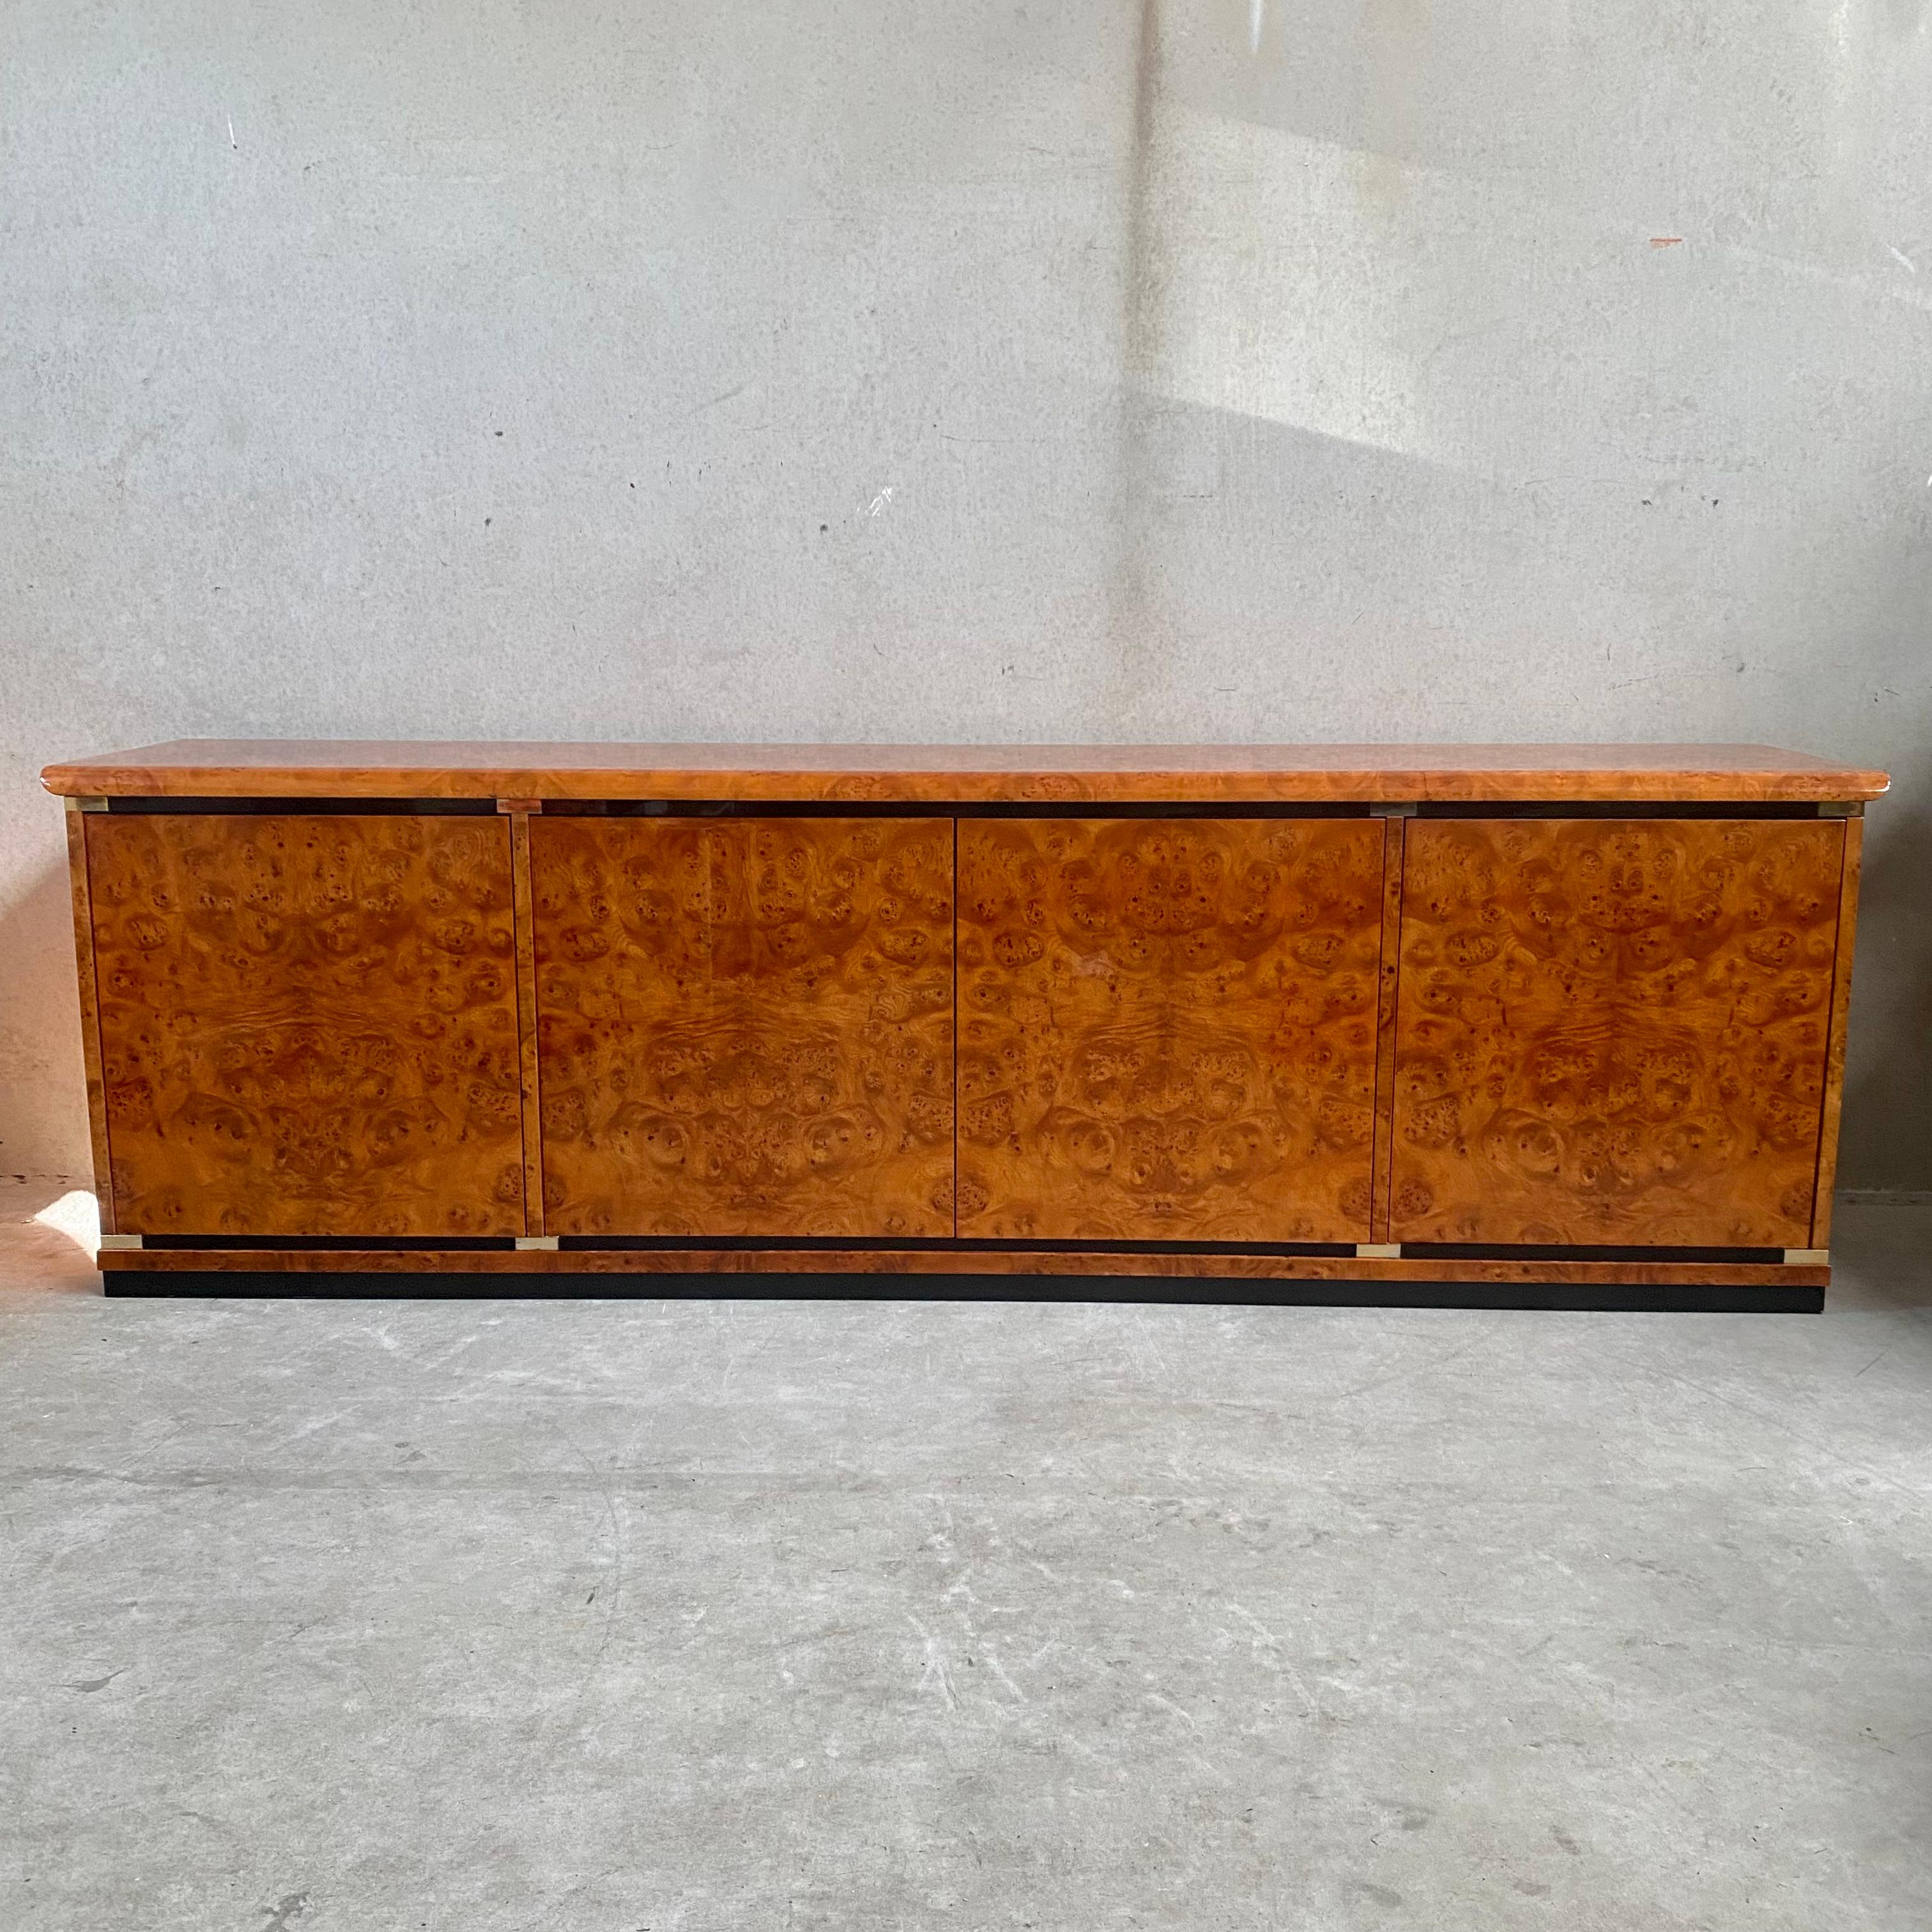 Late 20th Century Briar Burl Wood Sideboard by Guerini Emilio for Gdm 24 Kt Gold Plated Italy 1980 For Sale